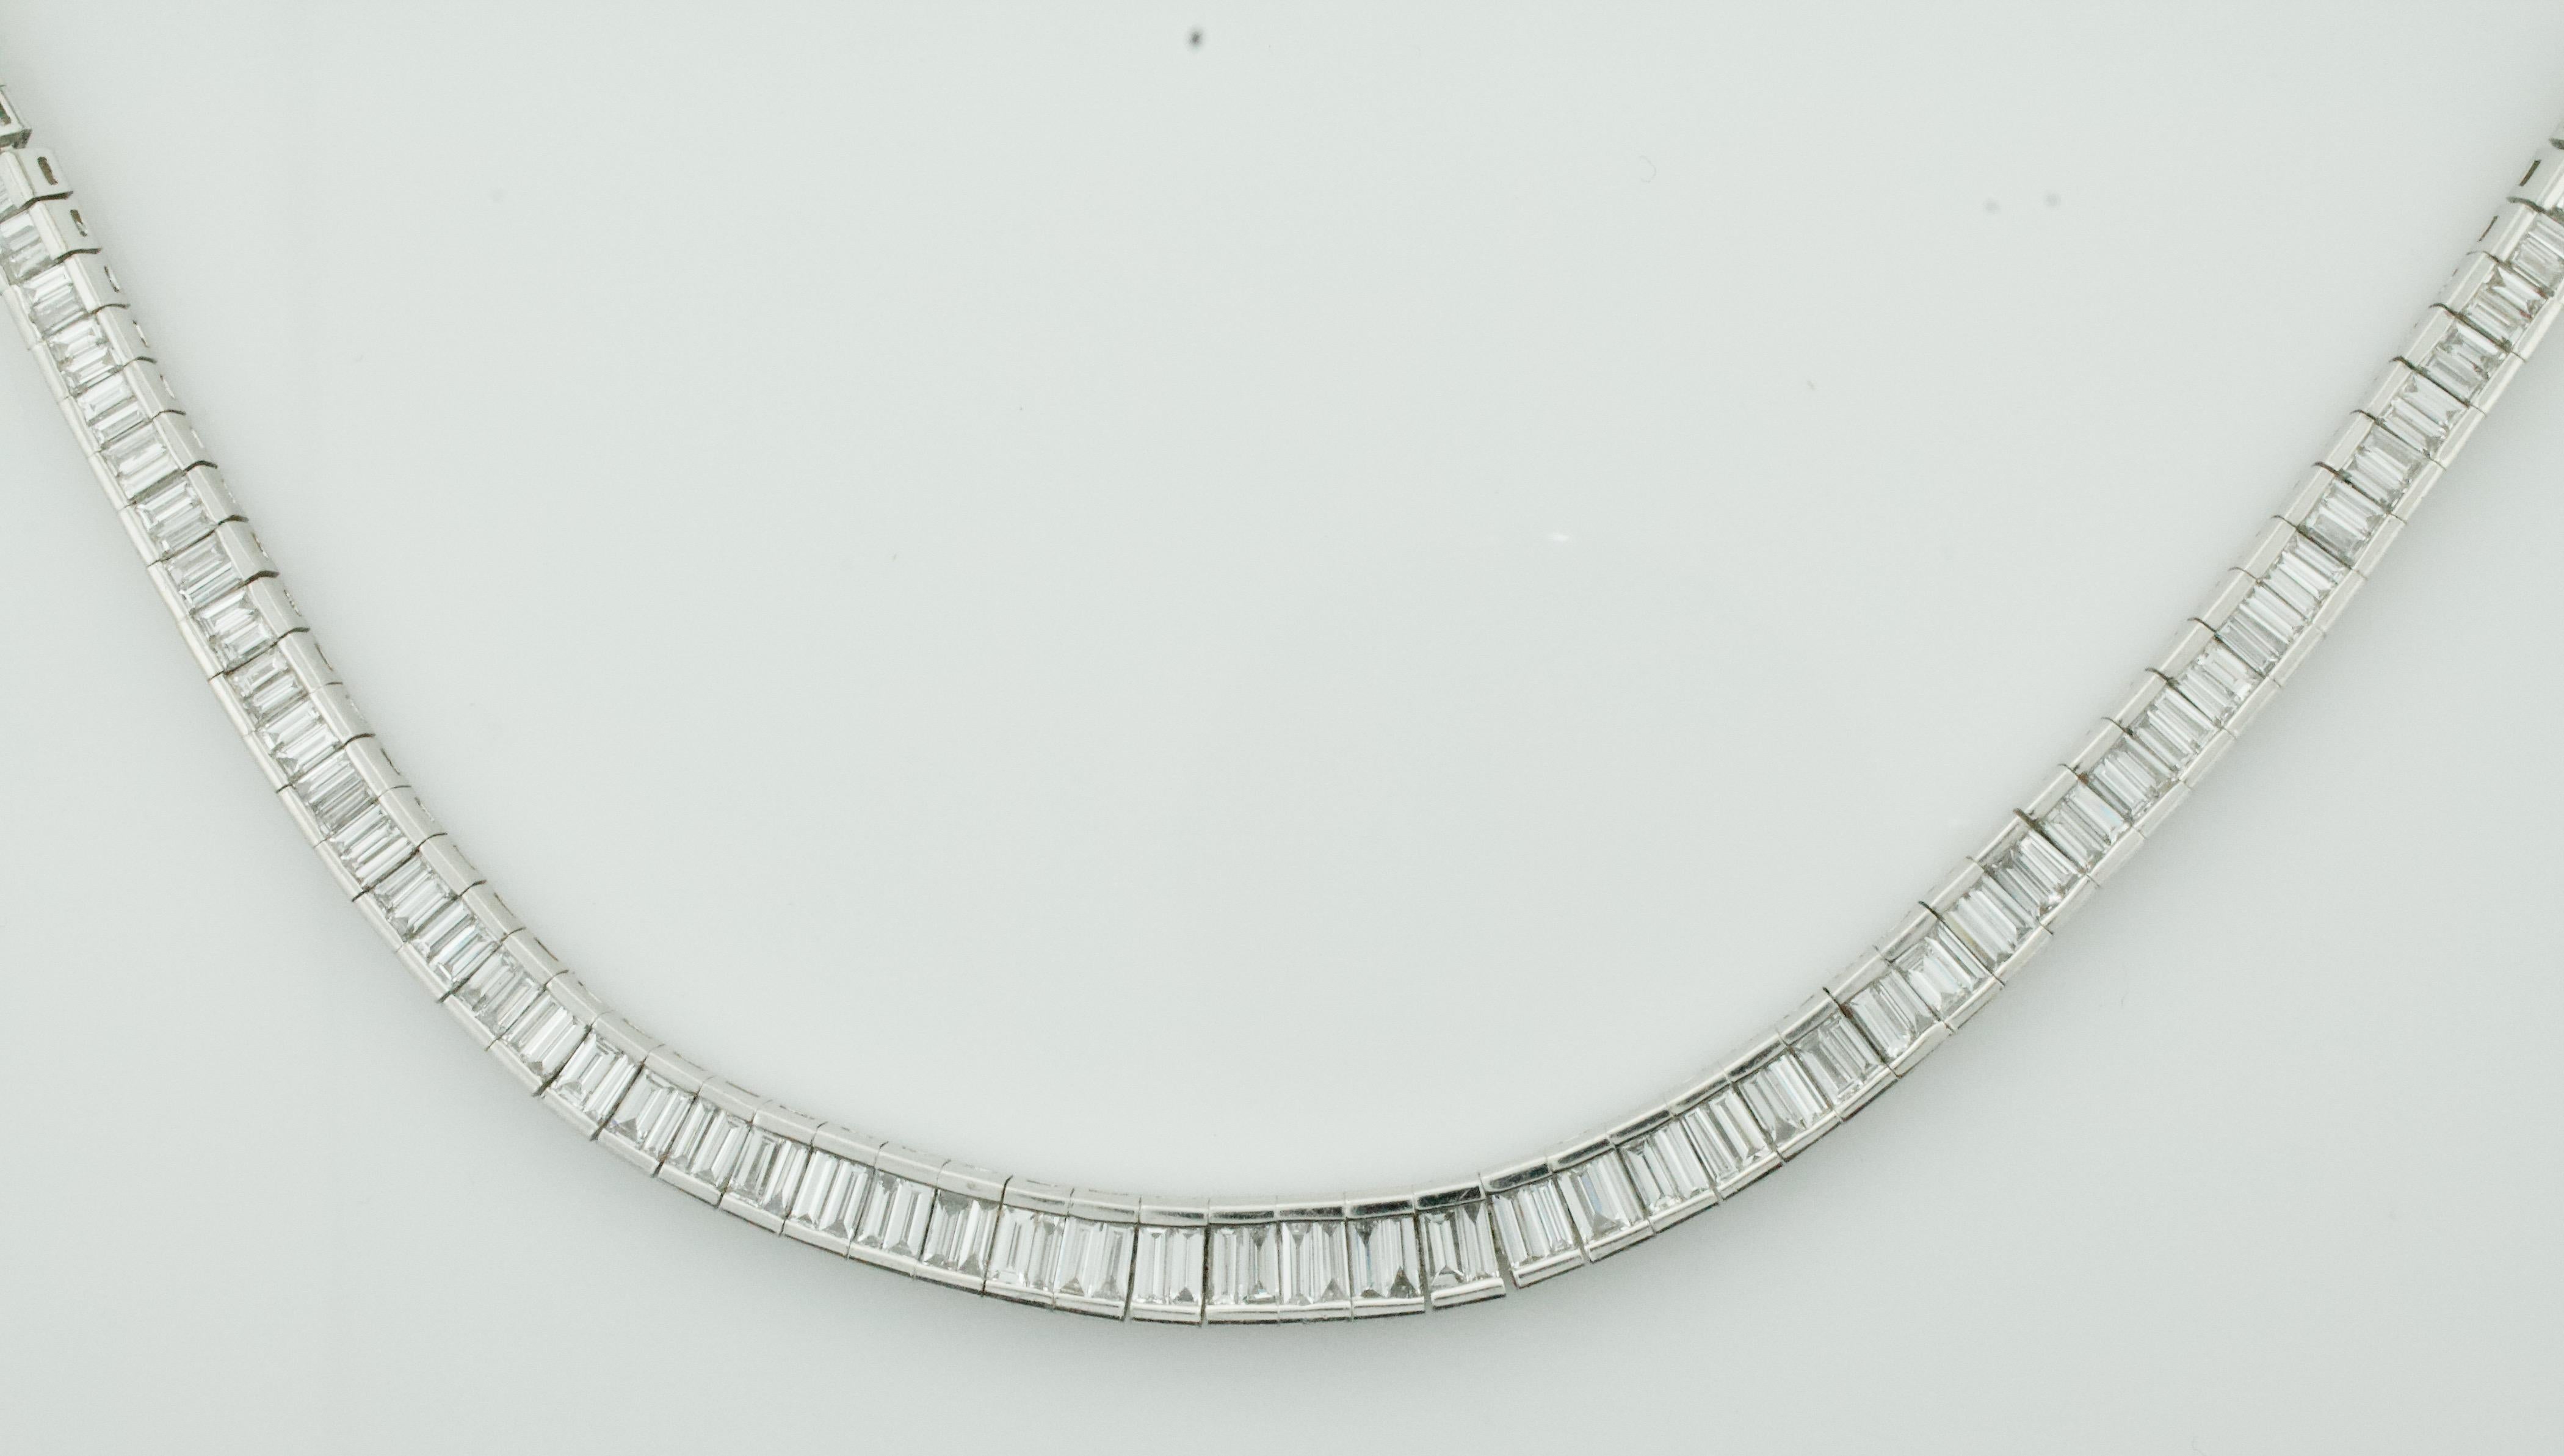 Platinum Baguette Diamond Straight Line Necklace 17.50 carats
142 baguette Cut Diamonds Weighing 17.50 Carats Approximately [HI VVS-VS2] [bright with no imperfections visible to the naked eye]

17 Inches in Length
6.2mm max 4.3 min

A Platinum